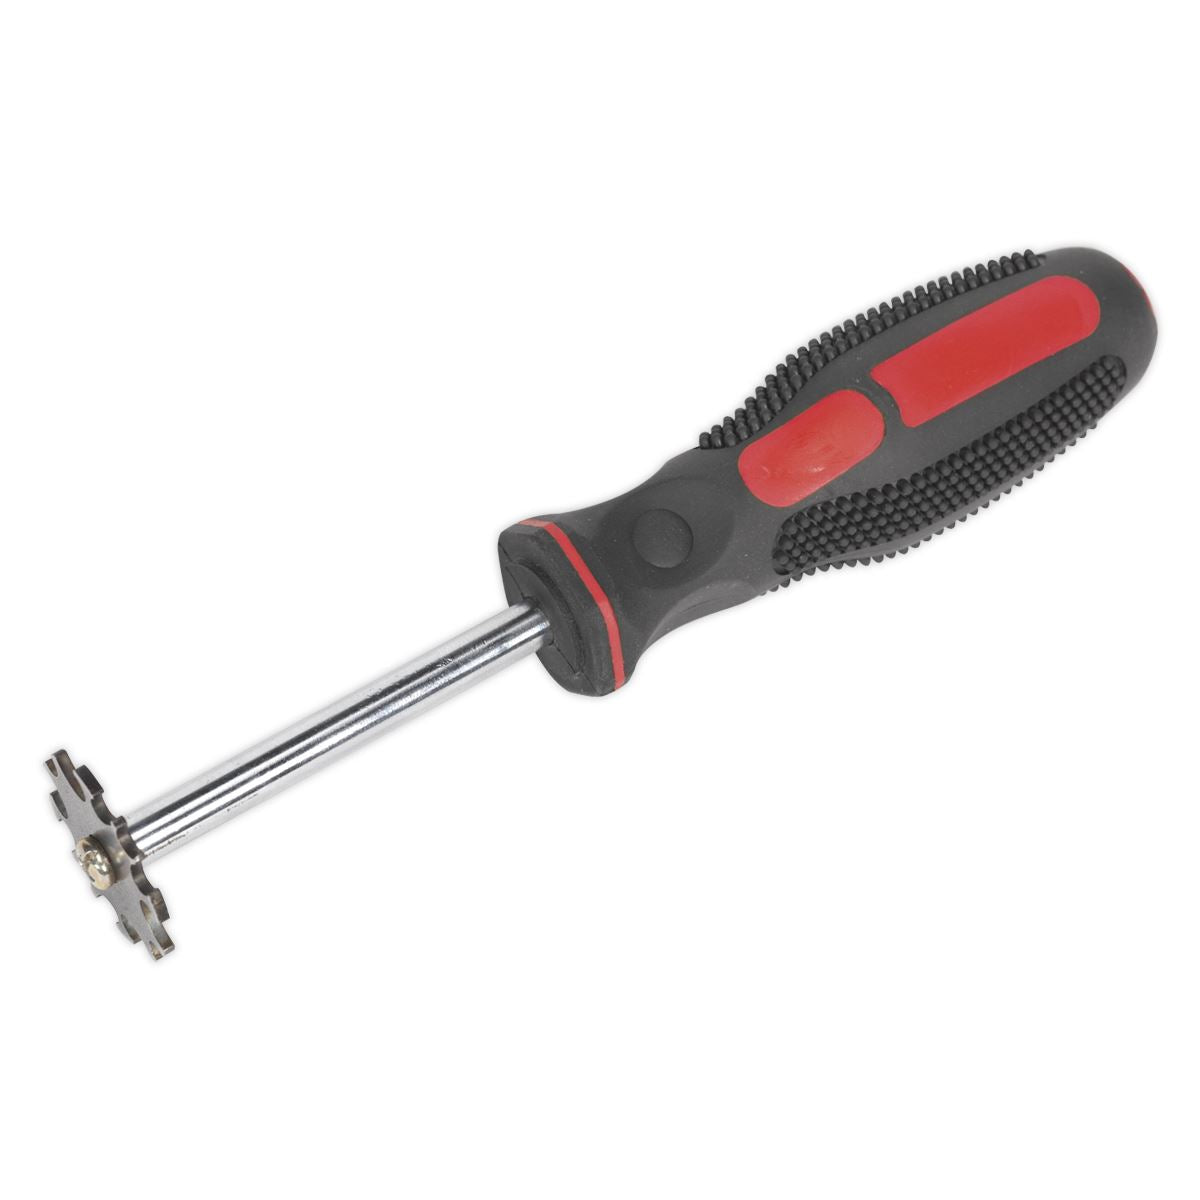 Sealey Brake & Fuel Pipe Inspection Tool